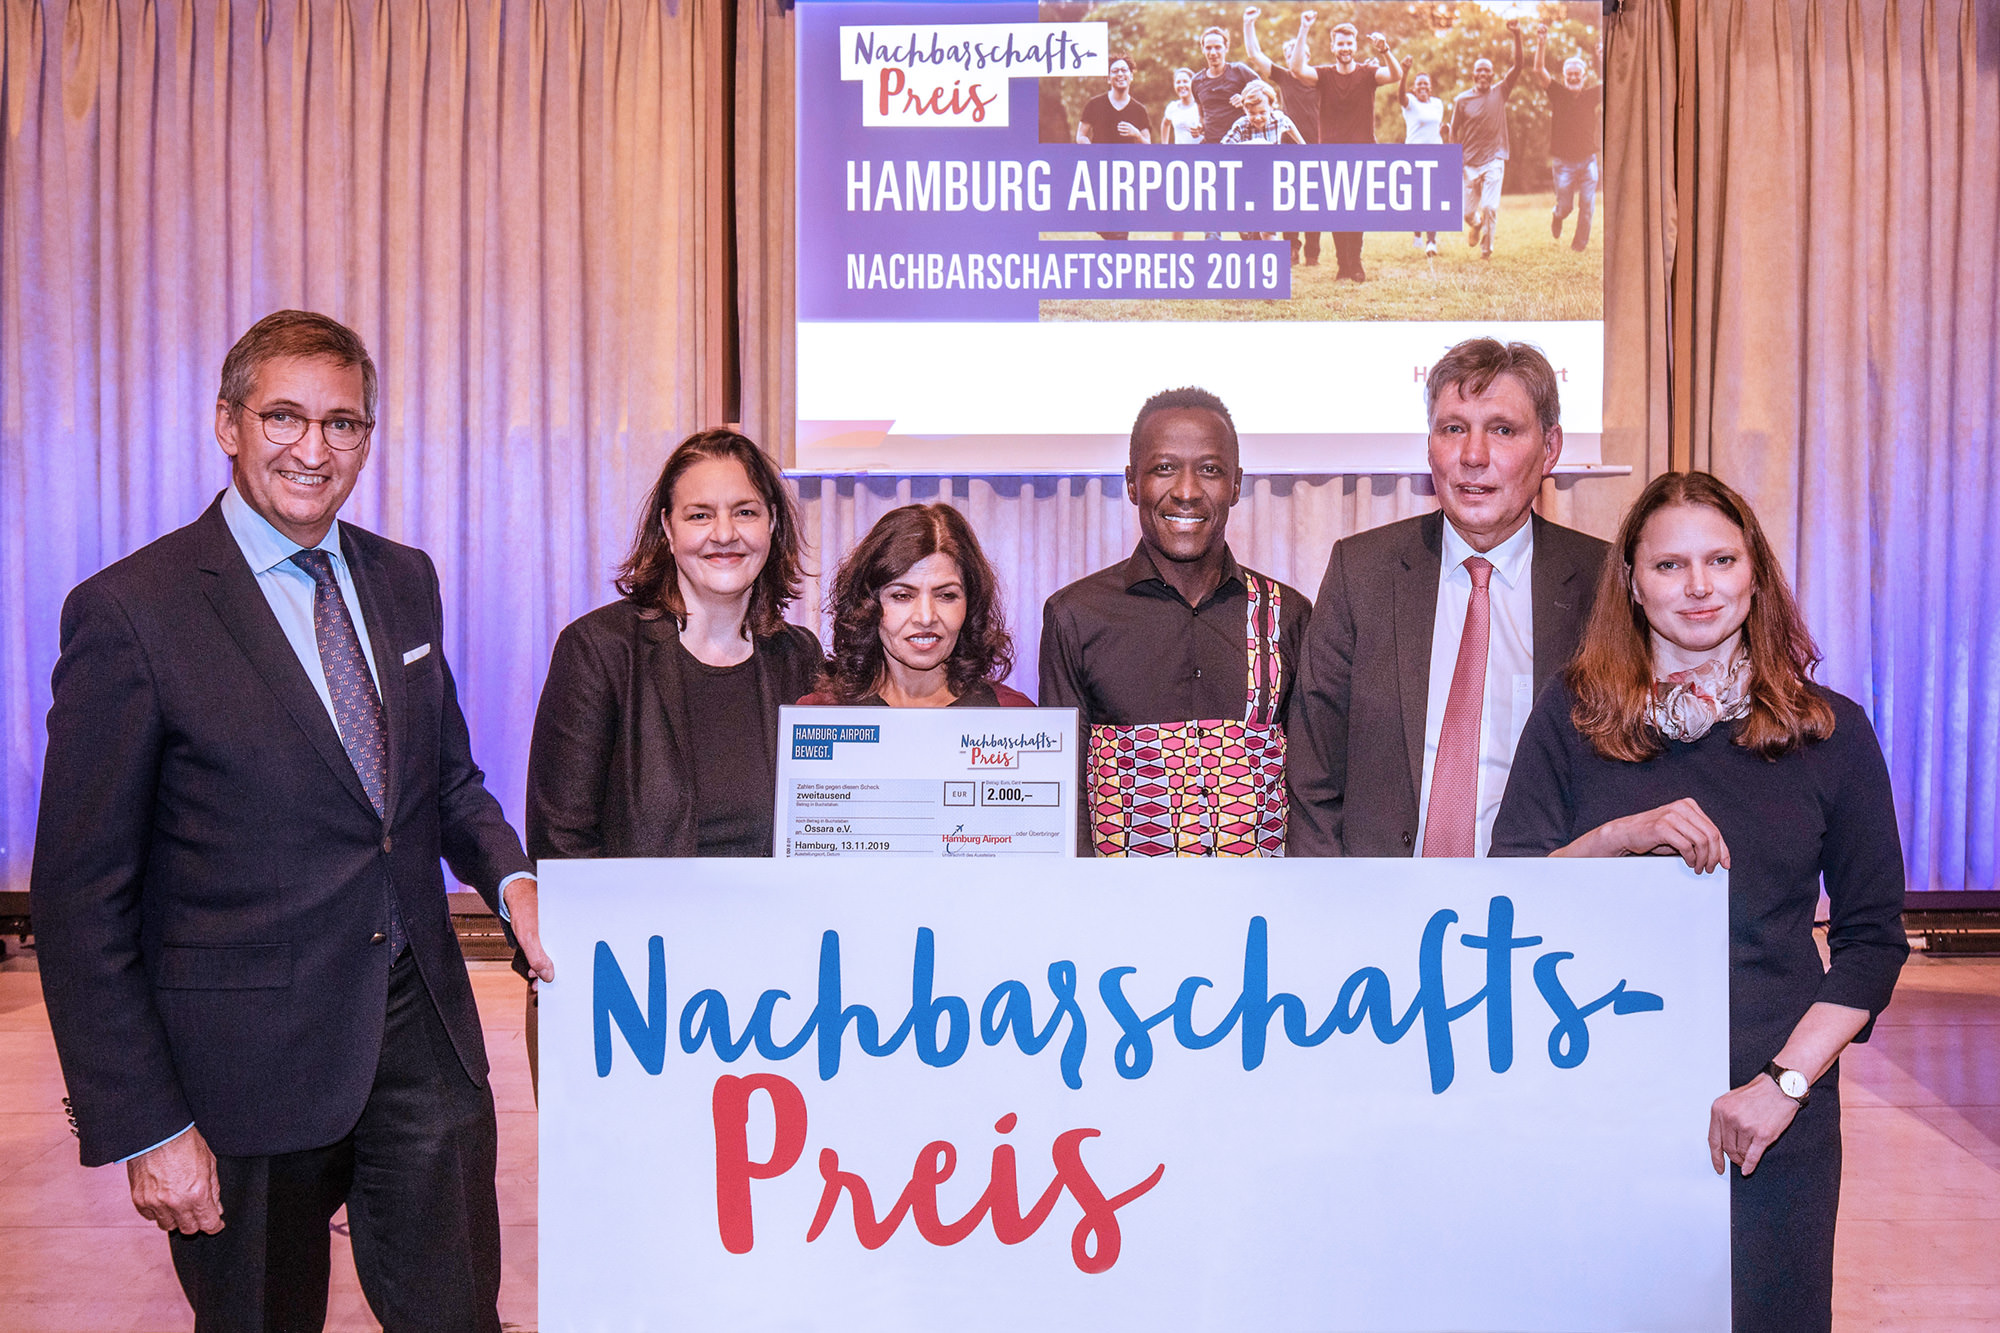 The jury prize of Hamburg Airport’s Neighbourhood Prize, donated by AviAlliance, in 2019 went to the association Ossara.